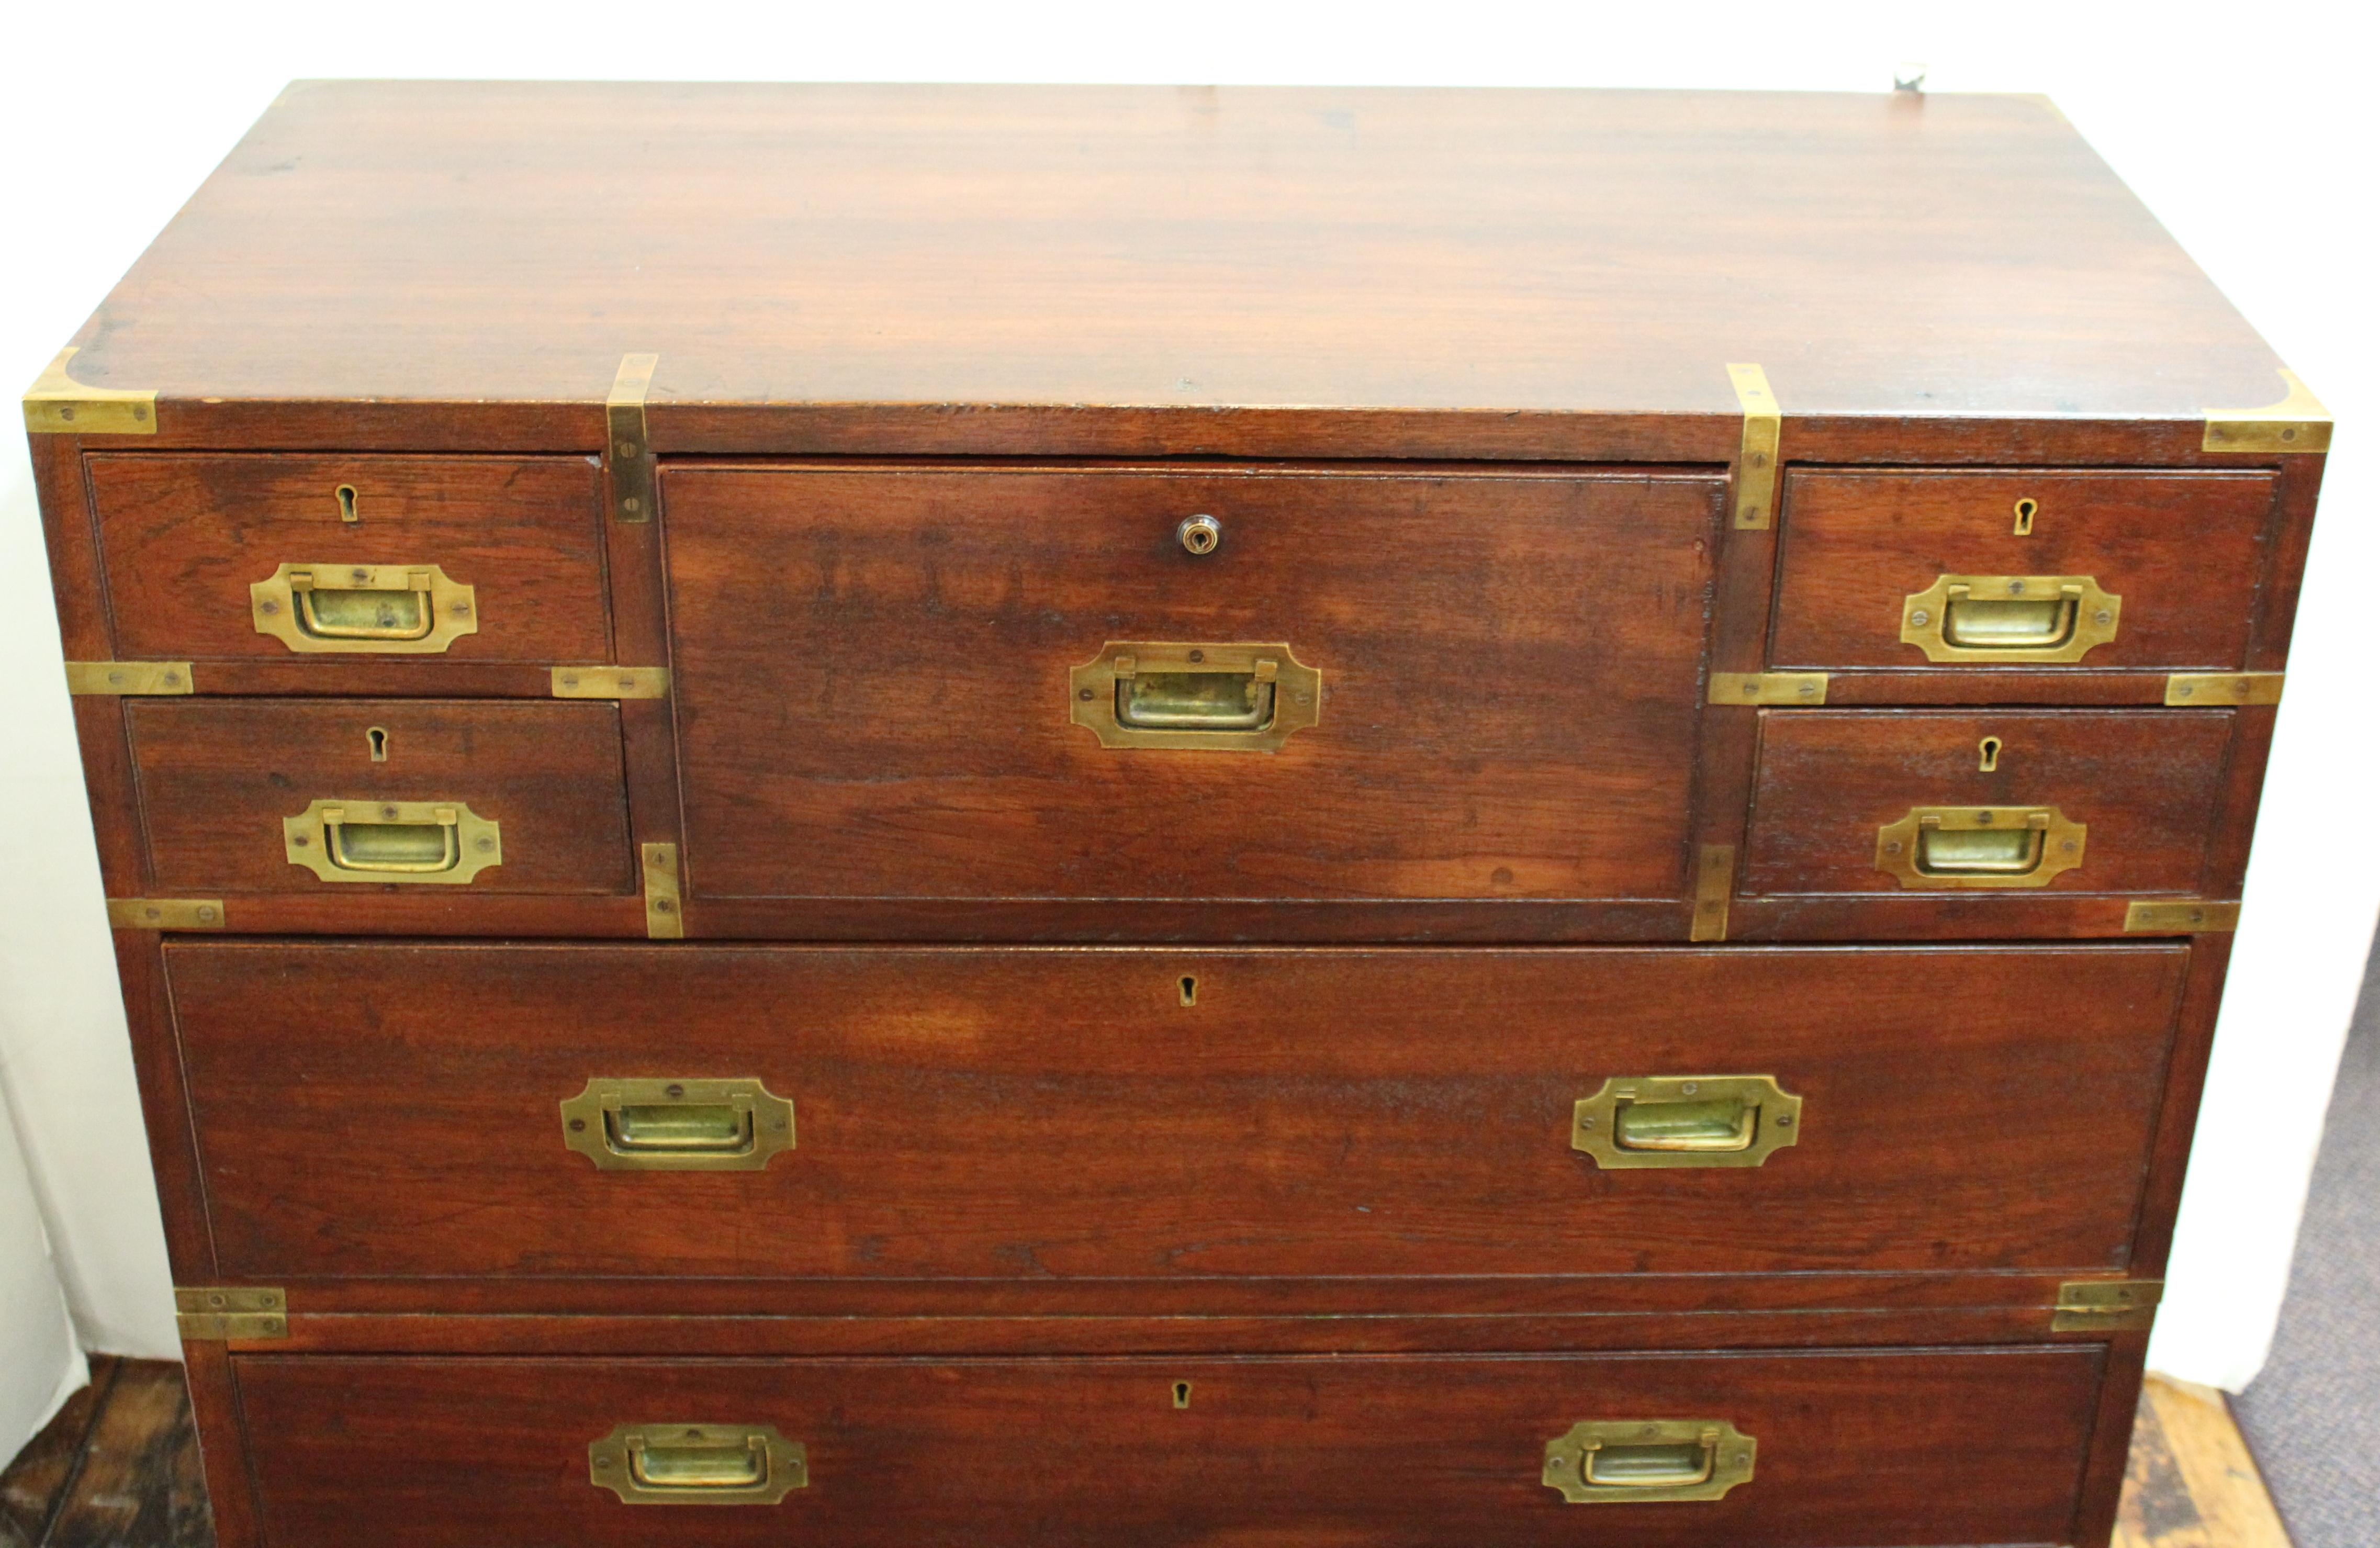 Victorian period Anglo-Indian Campaign chest in two parts, with brass mounts and hardware. The top central drawer contains a drop-front desk surface with multiple small drawers and a secret compartment. The lock plate on the desk drawer is stamped